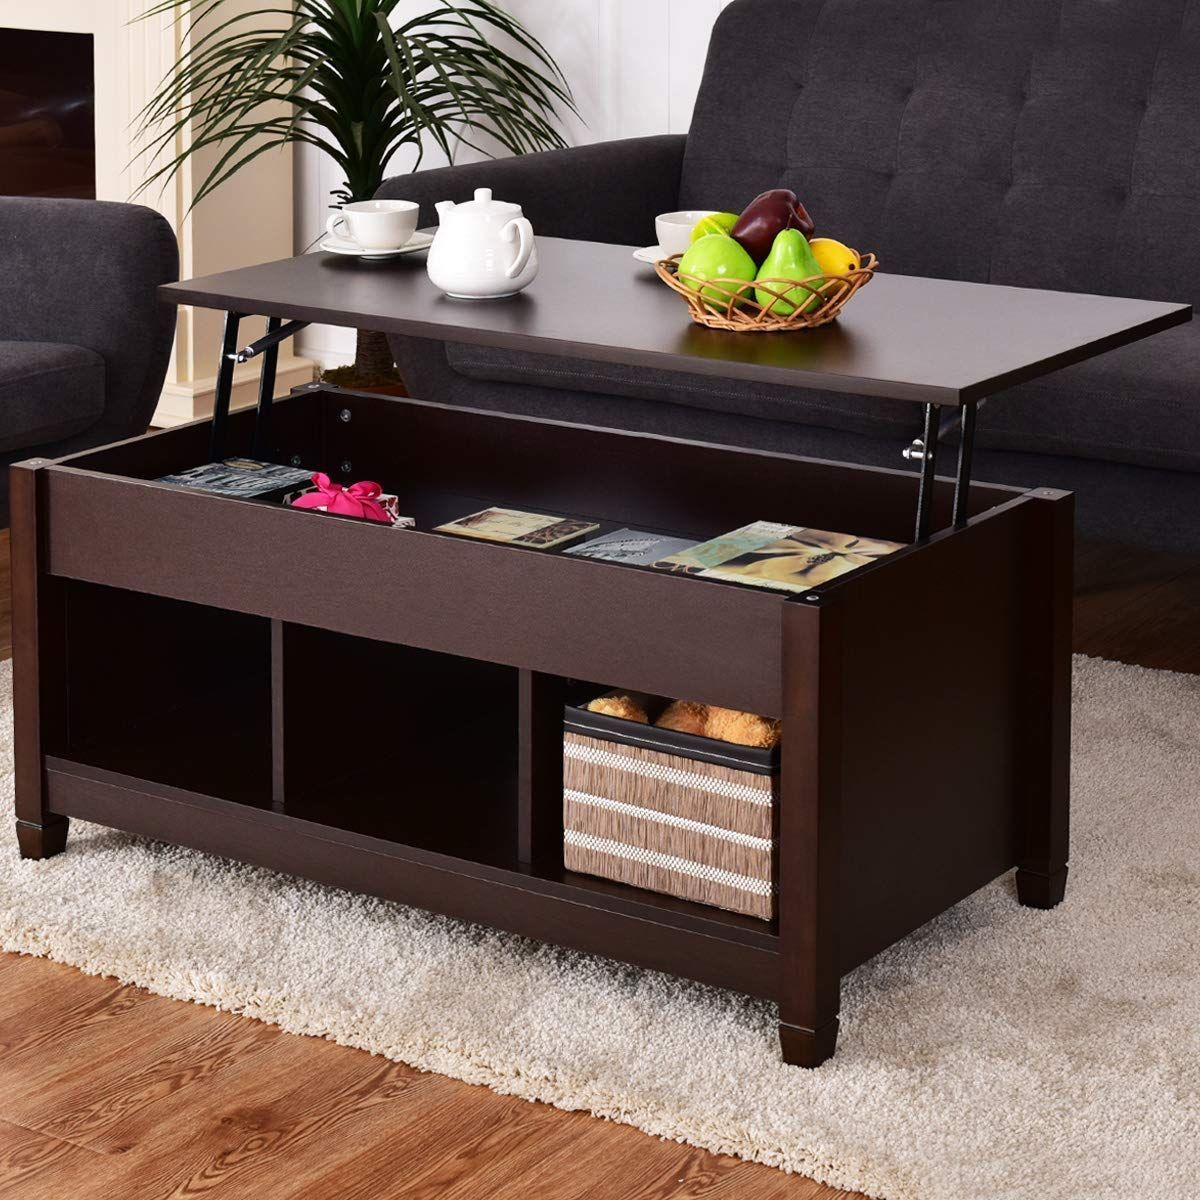 This Mid Century Modern Lift Top Coffee Table In A Beautiful Dark Wood For Modern Wooden Lift Top Tables (View 13 of 20)